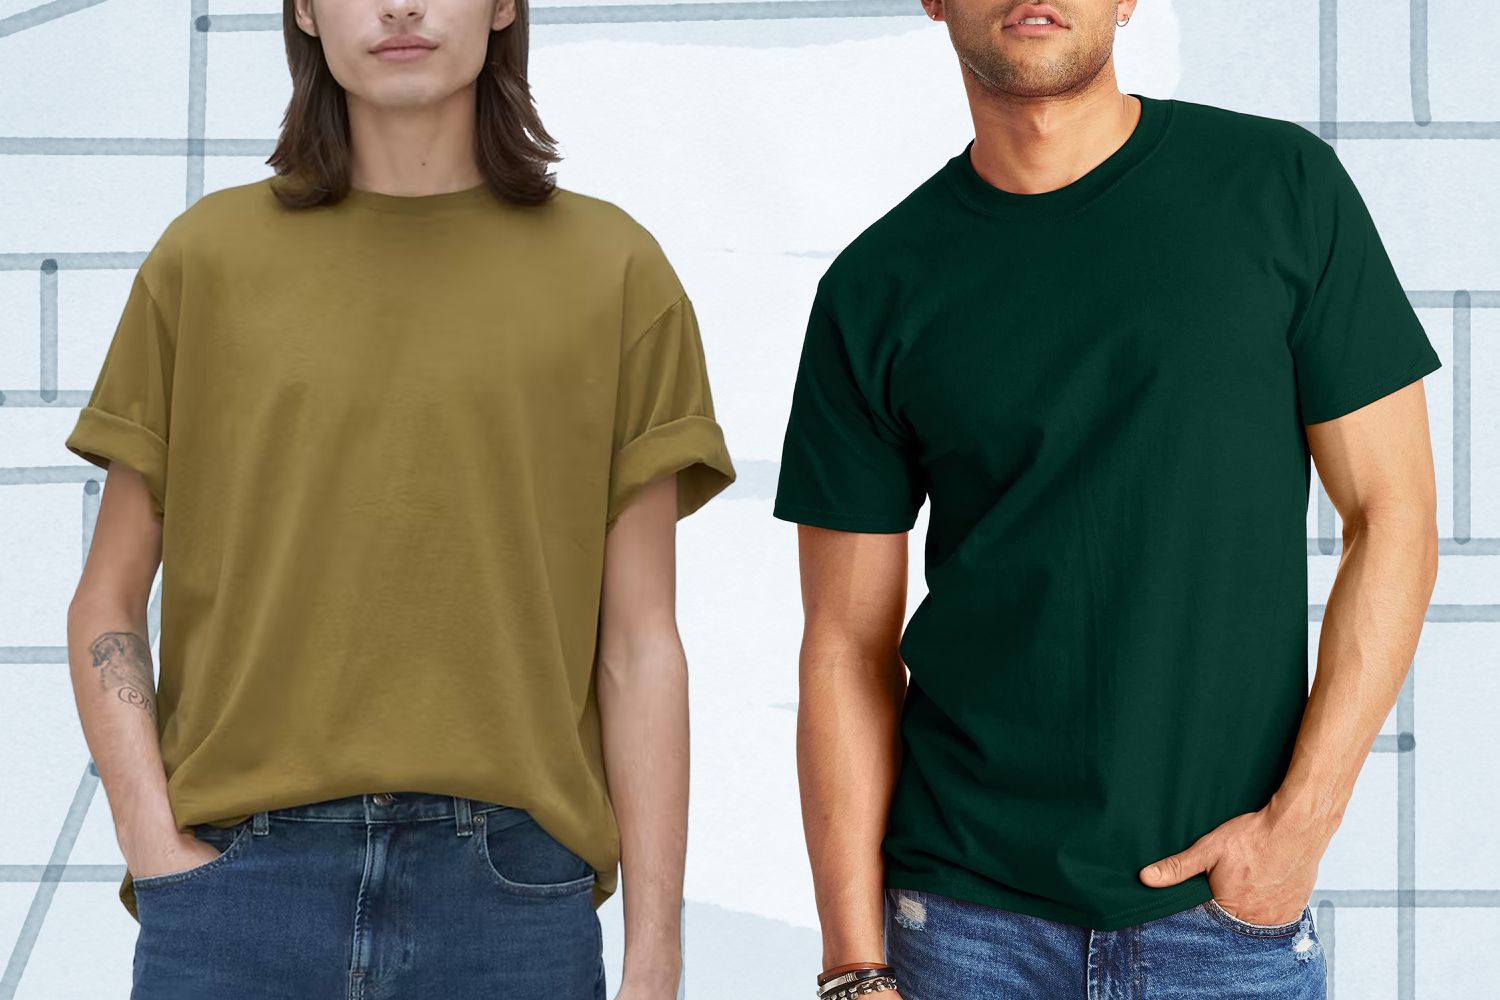 The Timeless Appeal of Men’s T-Shirts